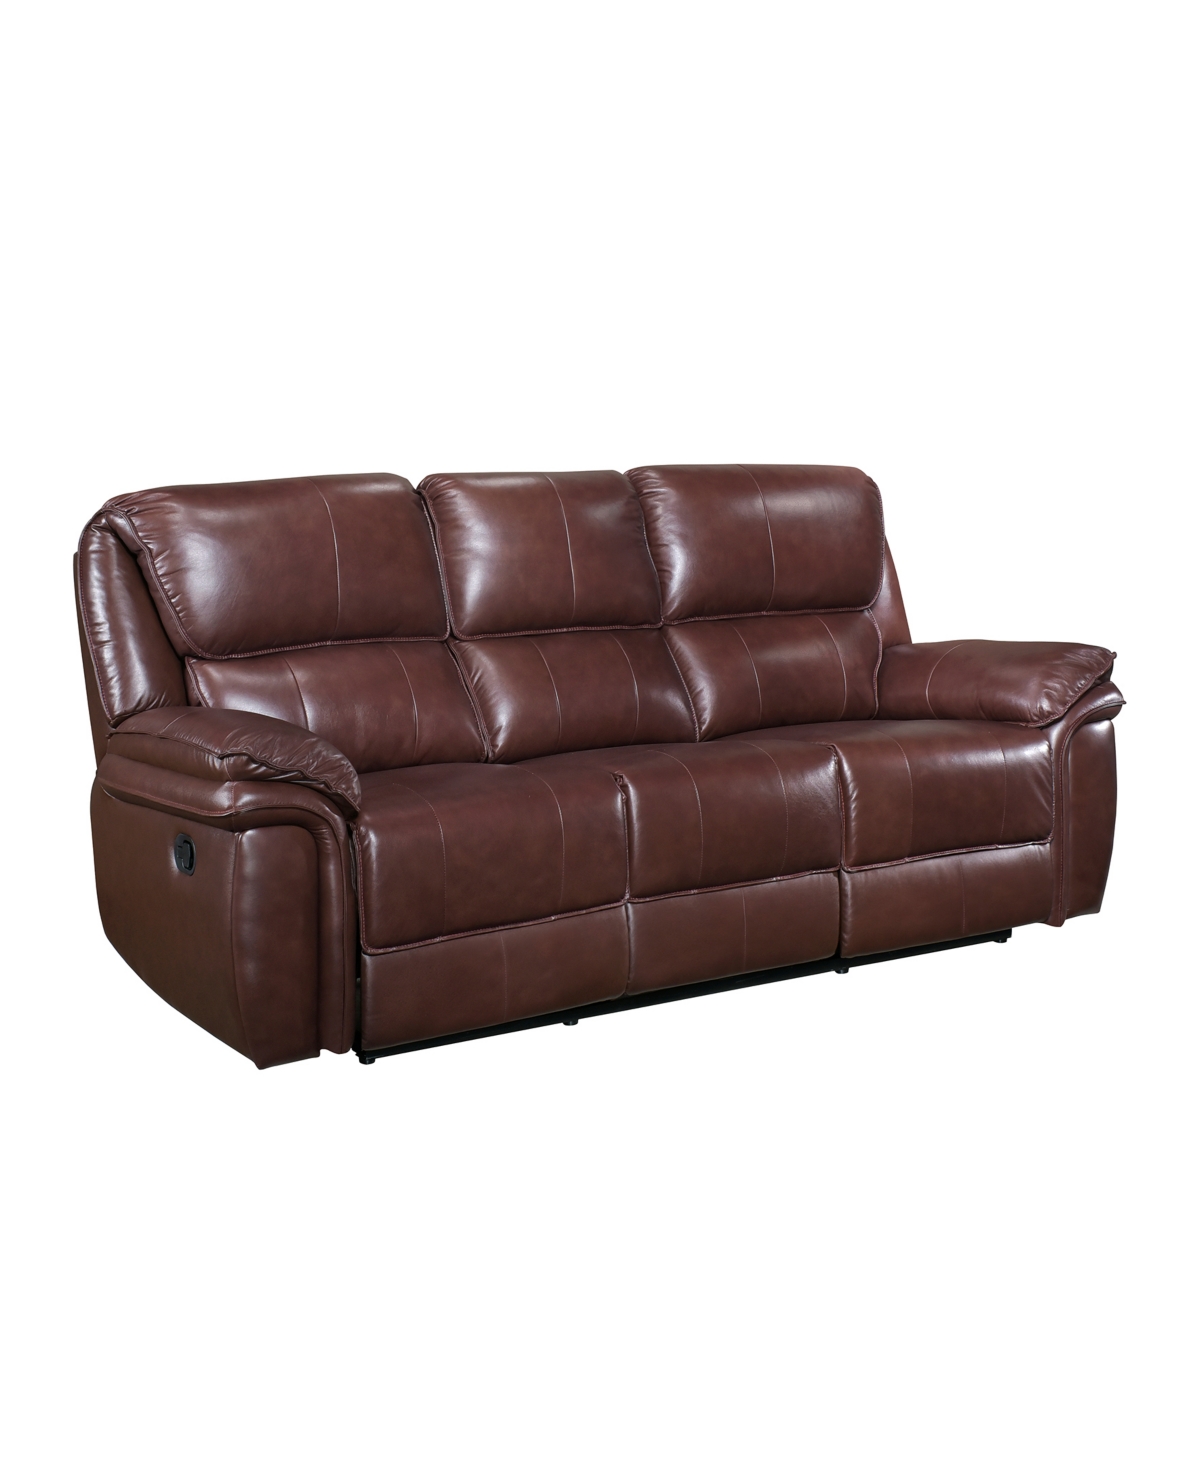 Homelegance White Label Colin 87" Leather Match Lay Flat Double Reclining Sofa In Brown